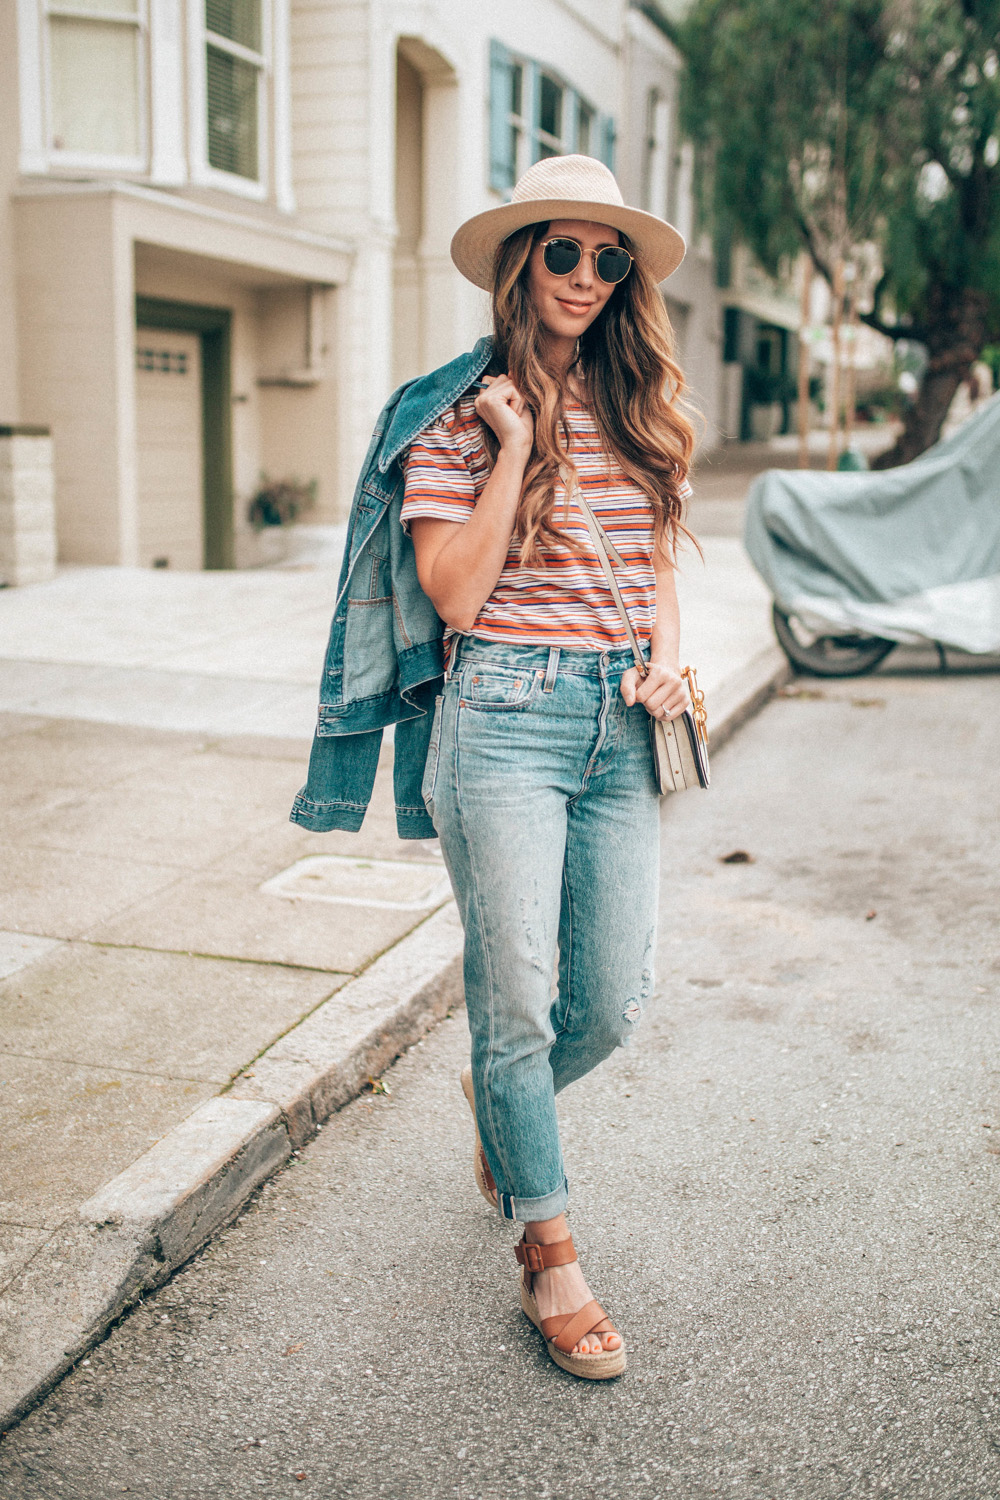 5 Easy Denim Outfits Fashion People Love for Spring